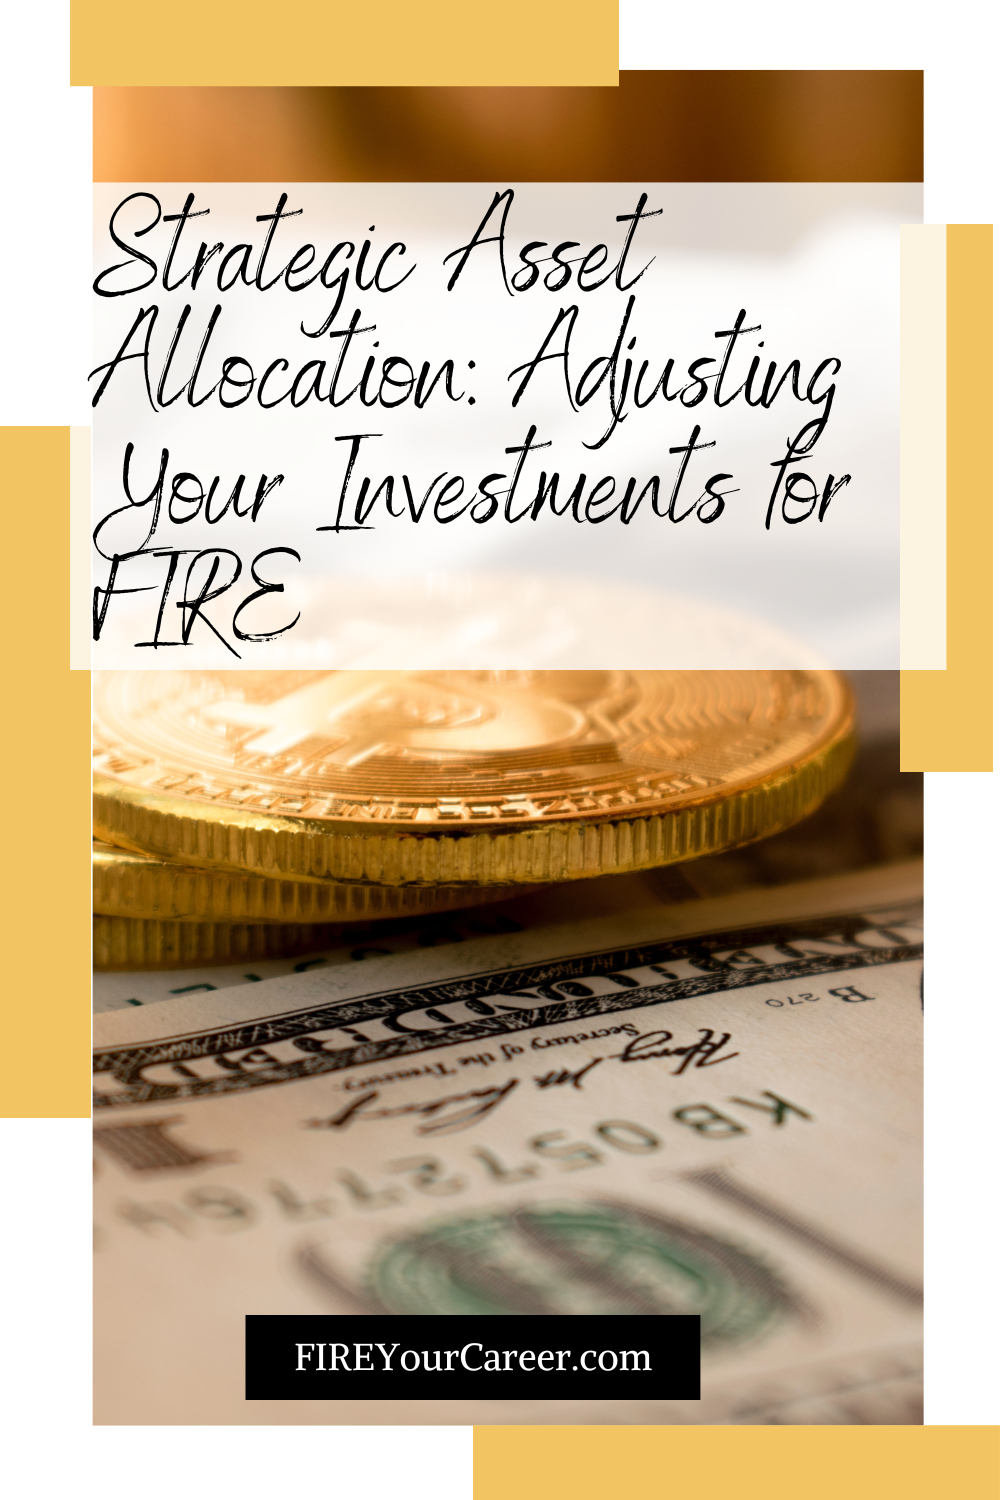 Strategic Asset Allocation Adjusting Your Investments for FIRE